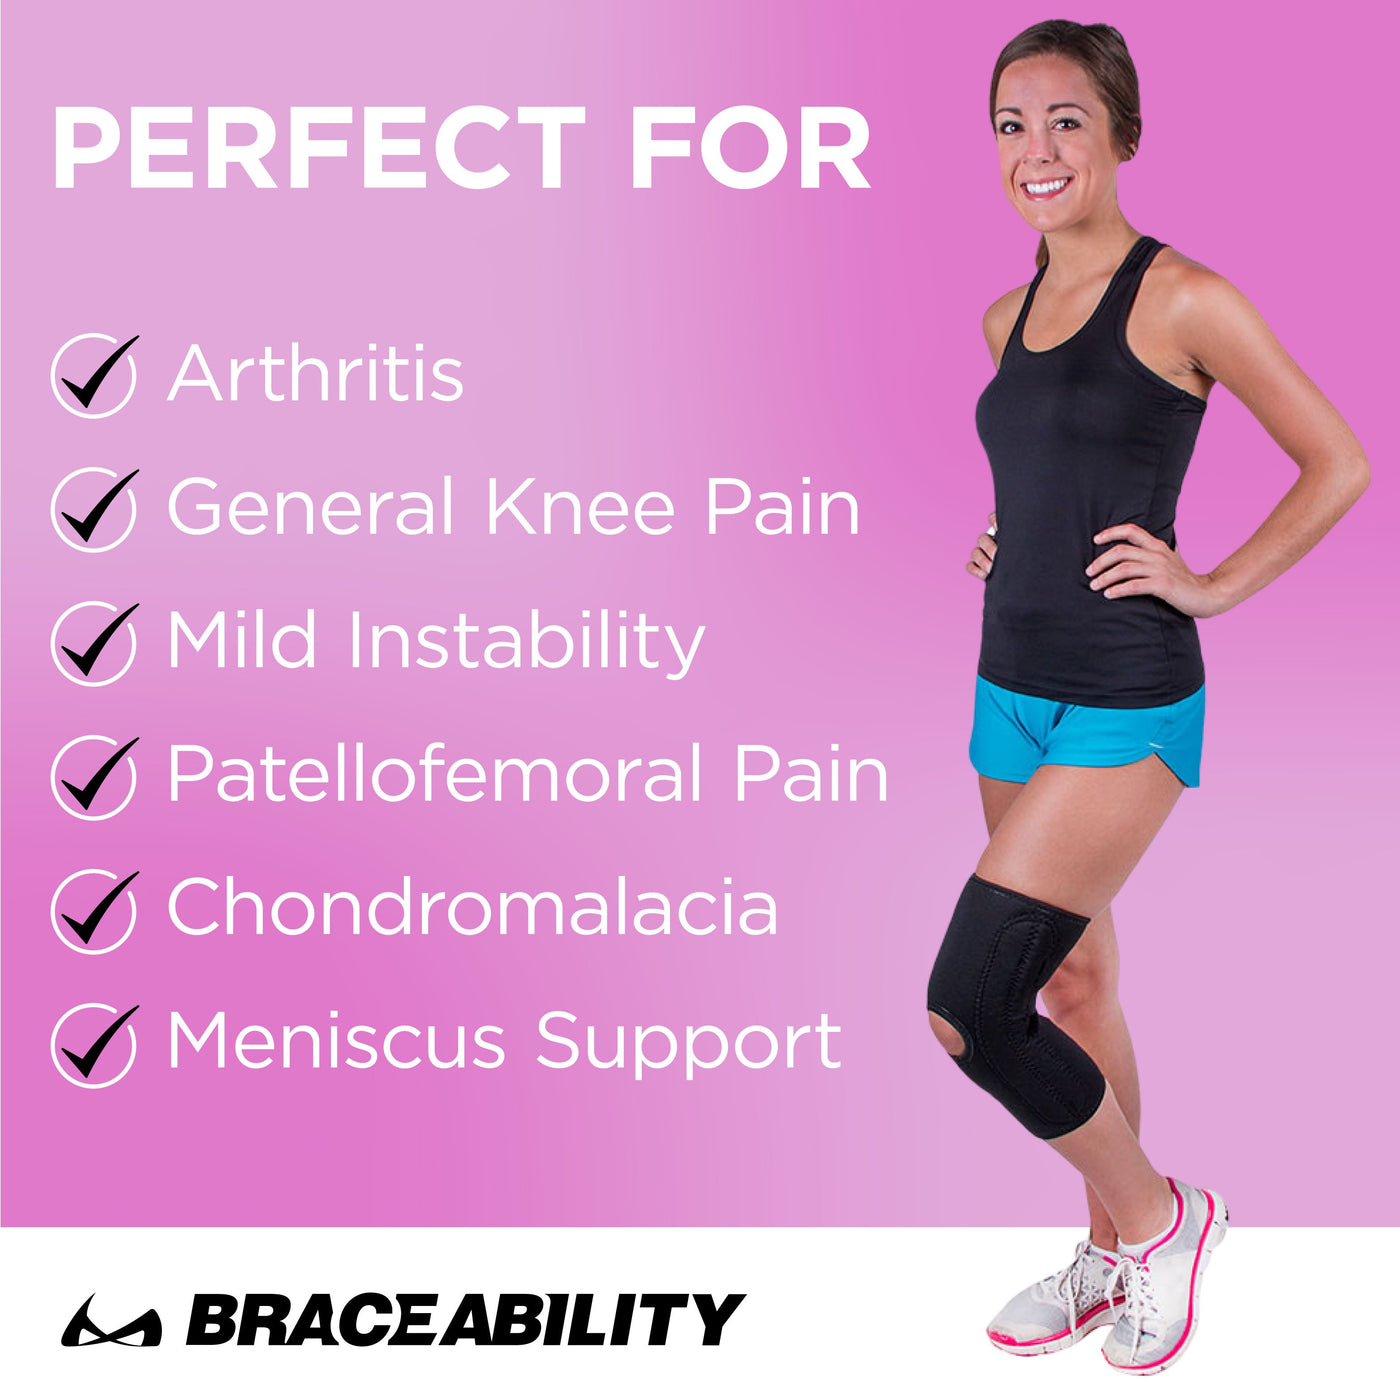 the women's patella knee brace is great for treatment from arthritis, chondromalacia, and general meniscus support